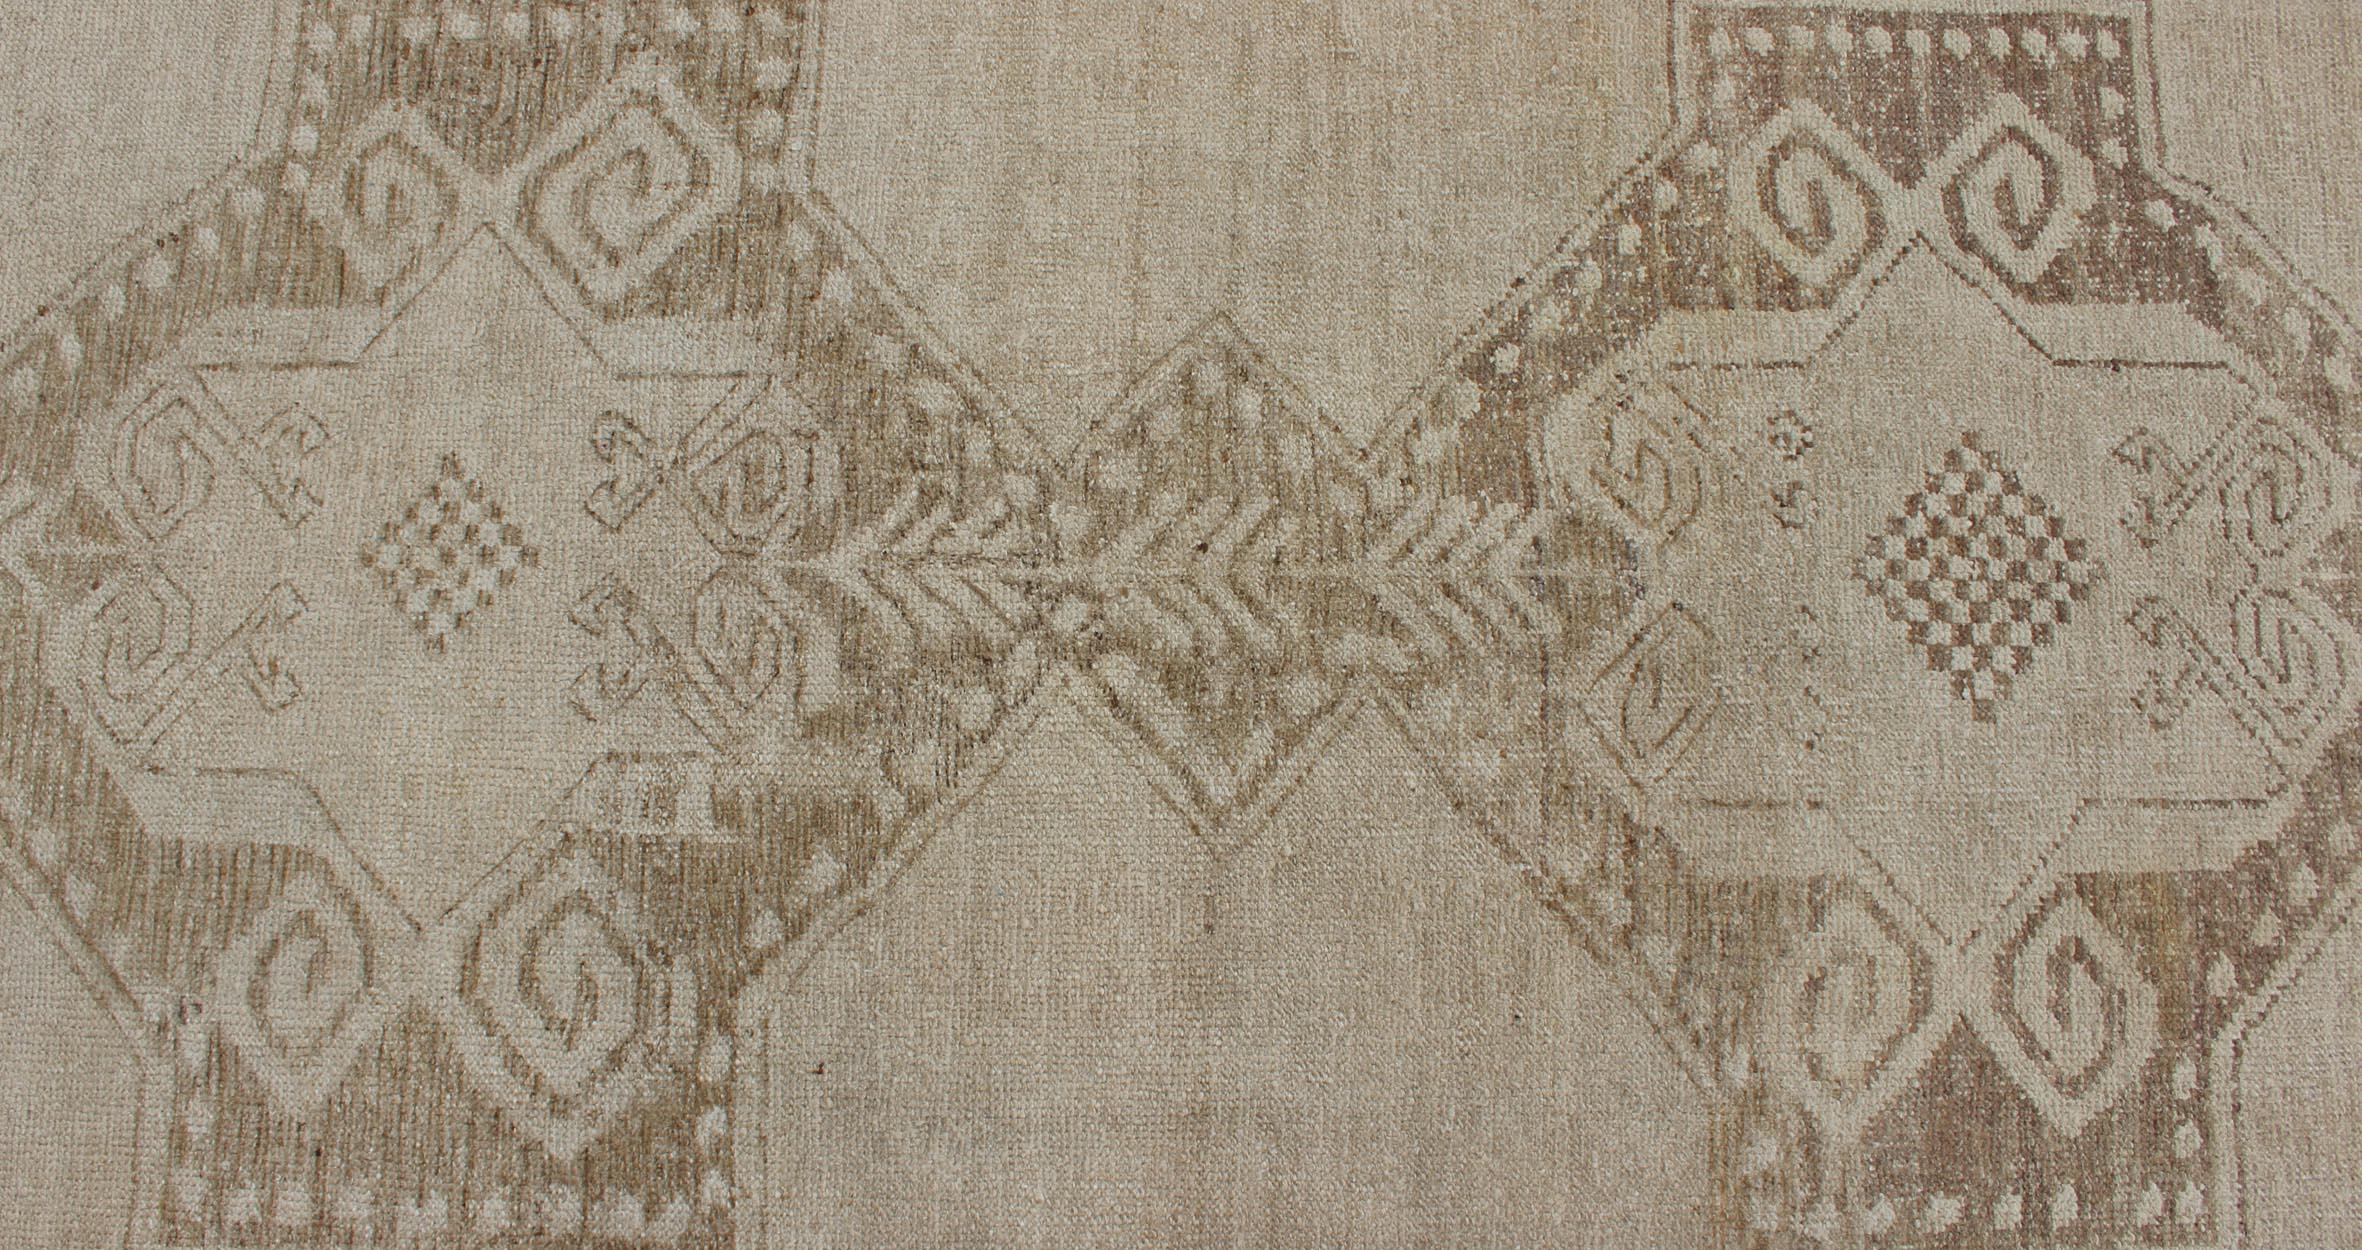 Wool Vintage Turkish Oushak Runner with Medallions in Taupe, Tan, and Browns For Sale